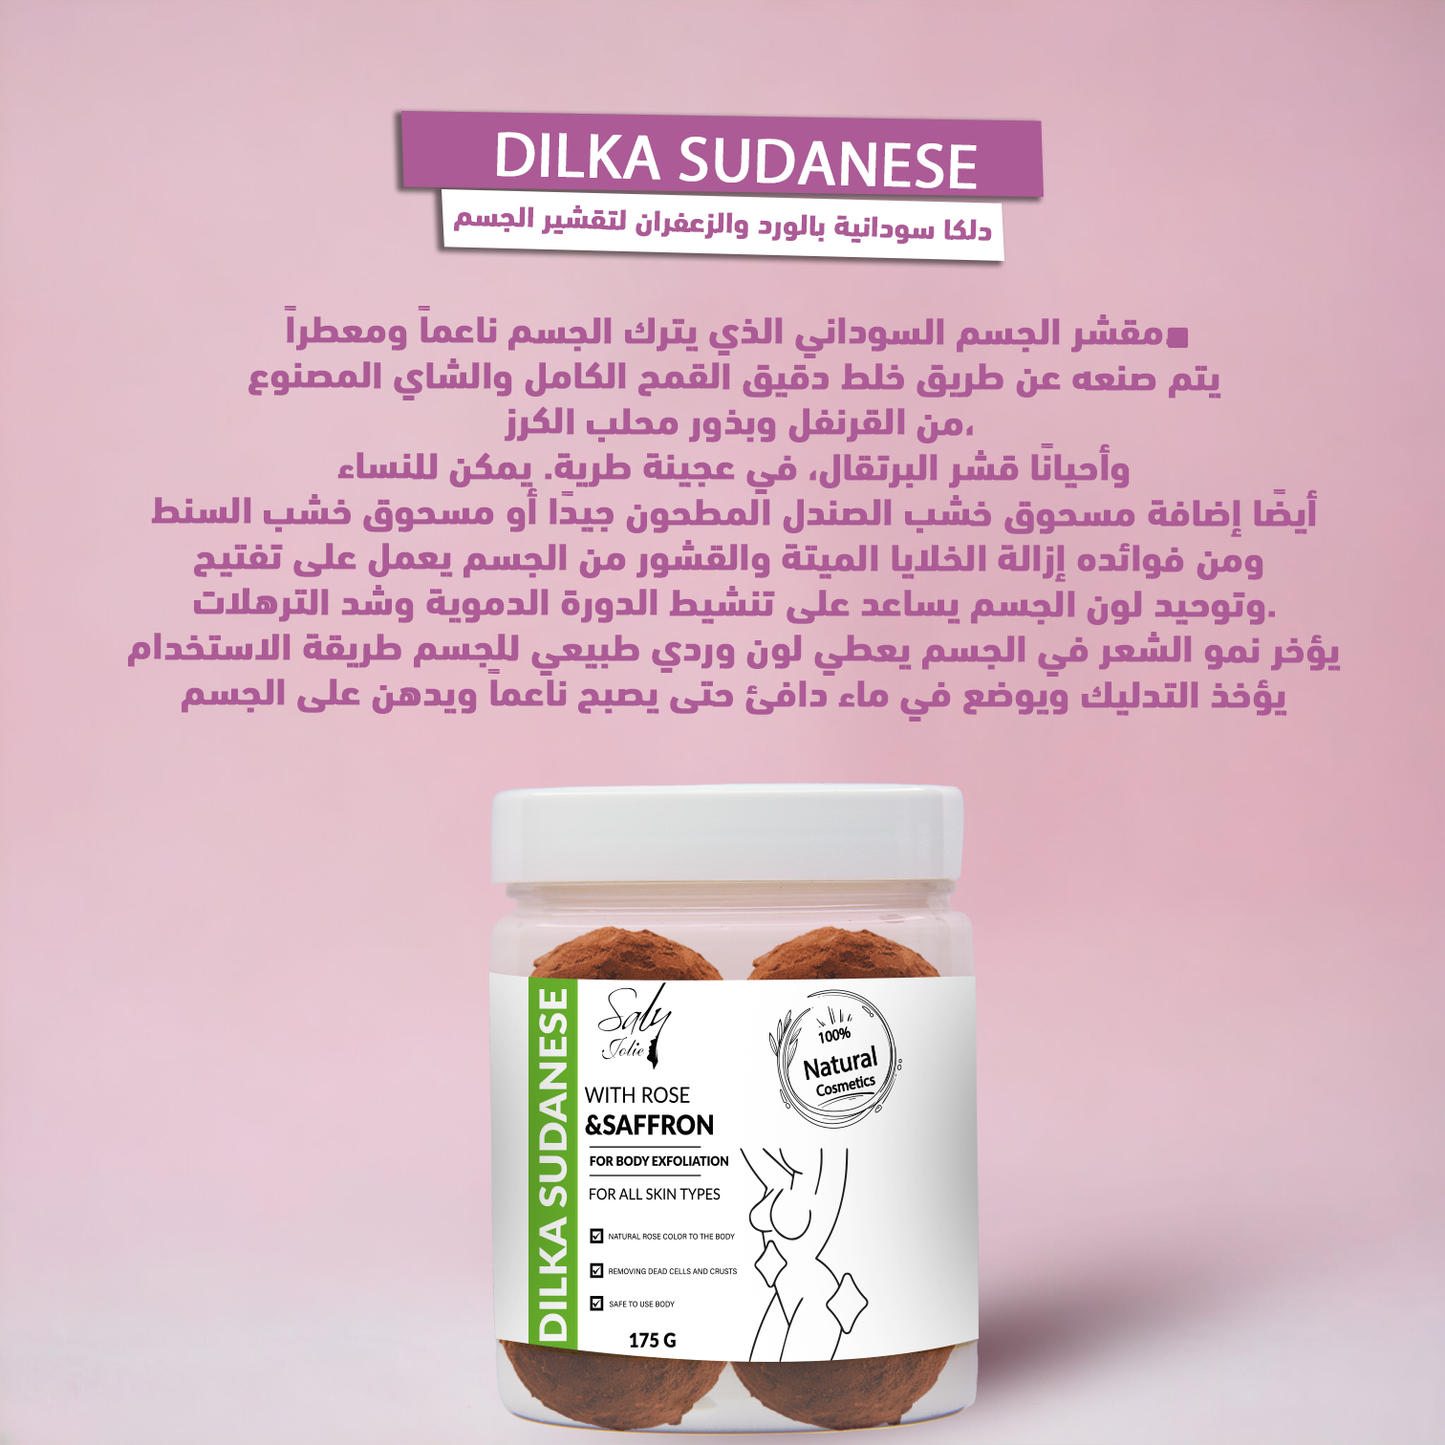 Dilka Sudanese with Rose and Saffron for Body Exfoliation